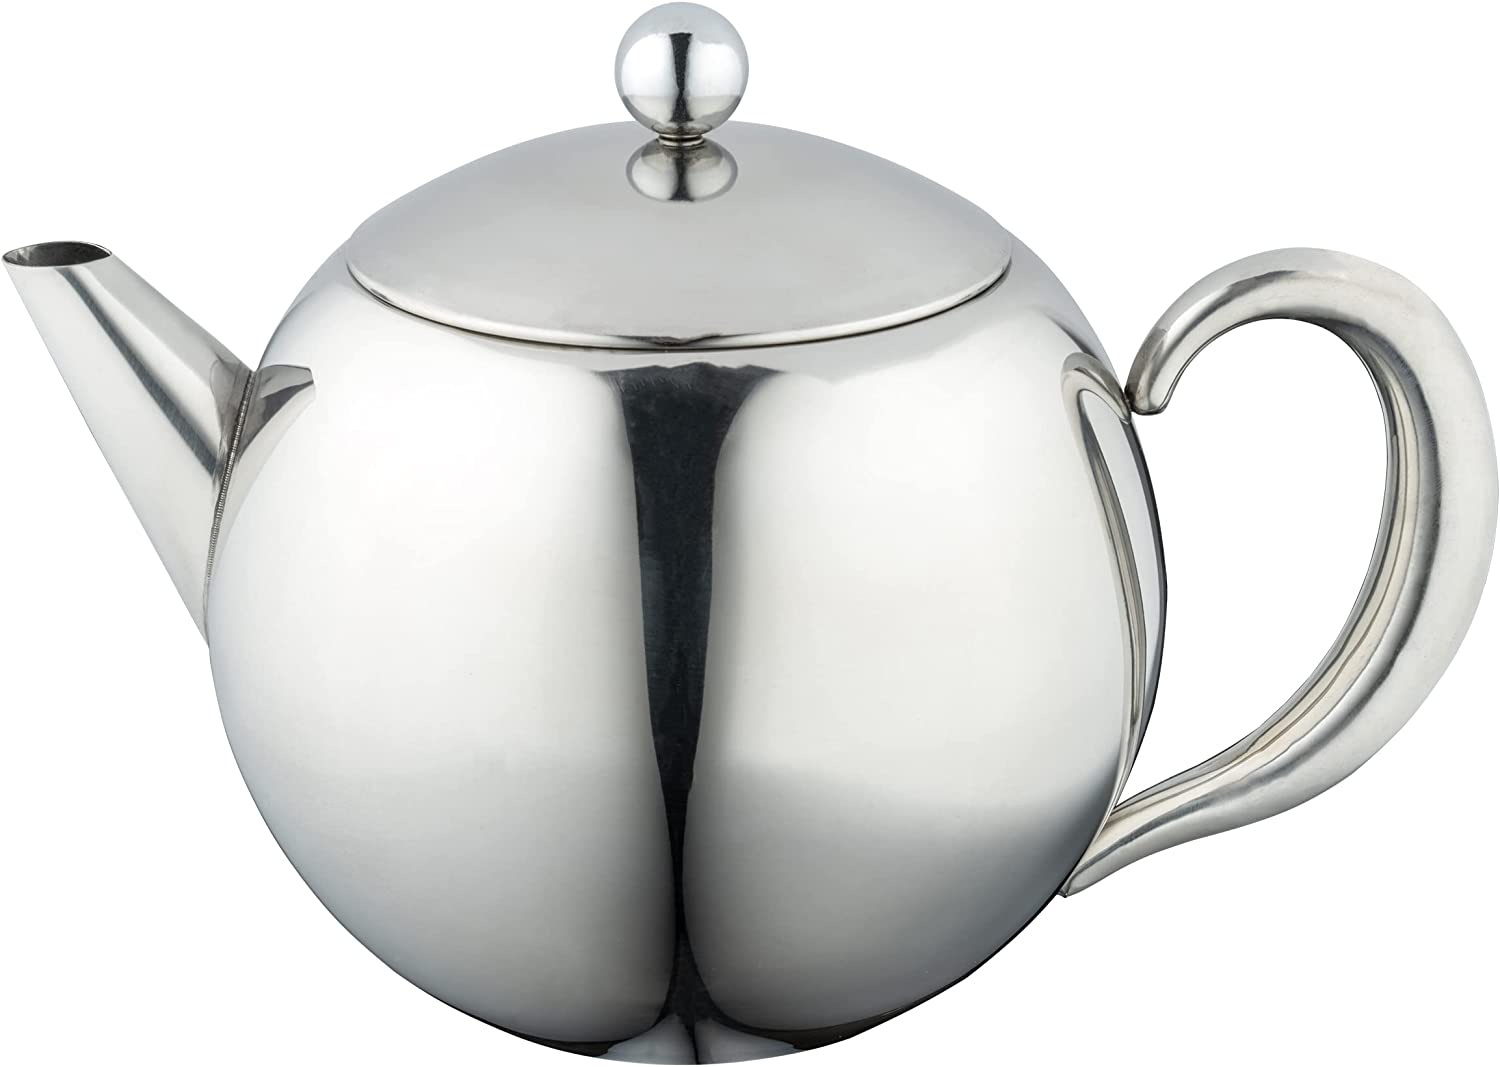 Cafe Ole Rondeo 50oz/1.5ltr Stainless Steel Teapot with Removable Infuser